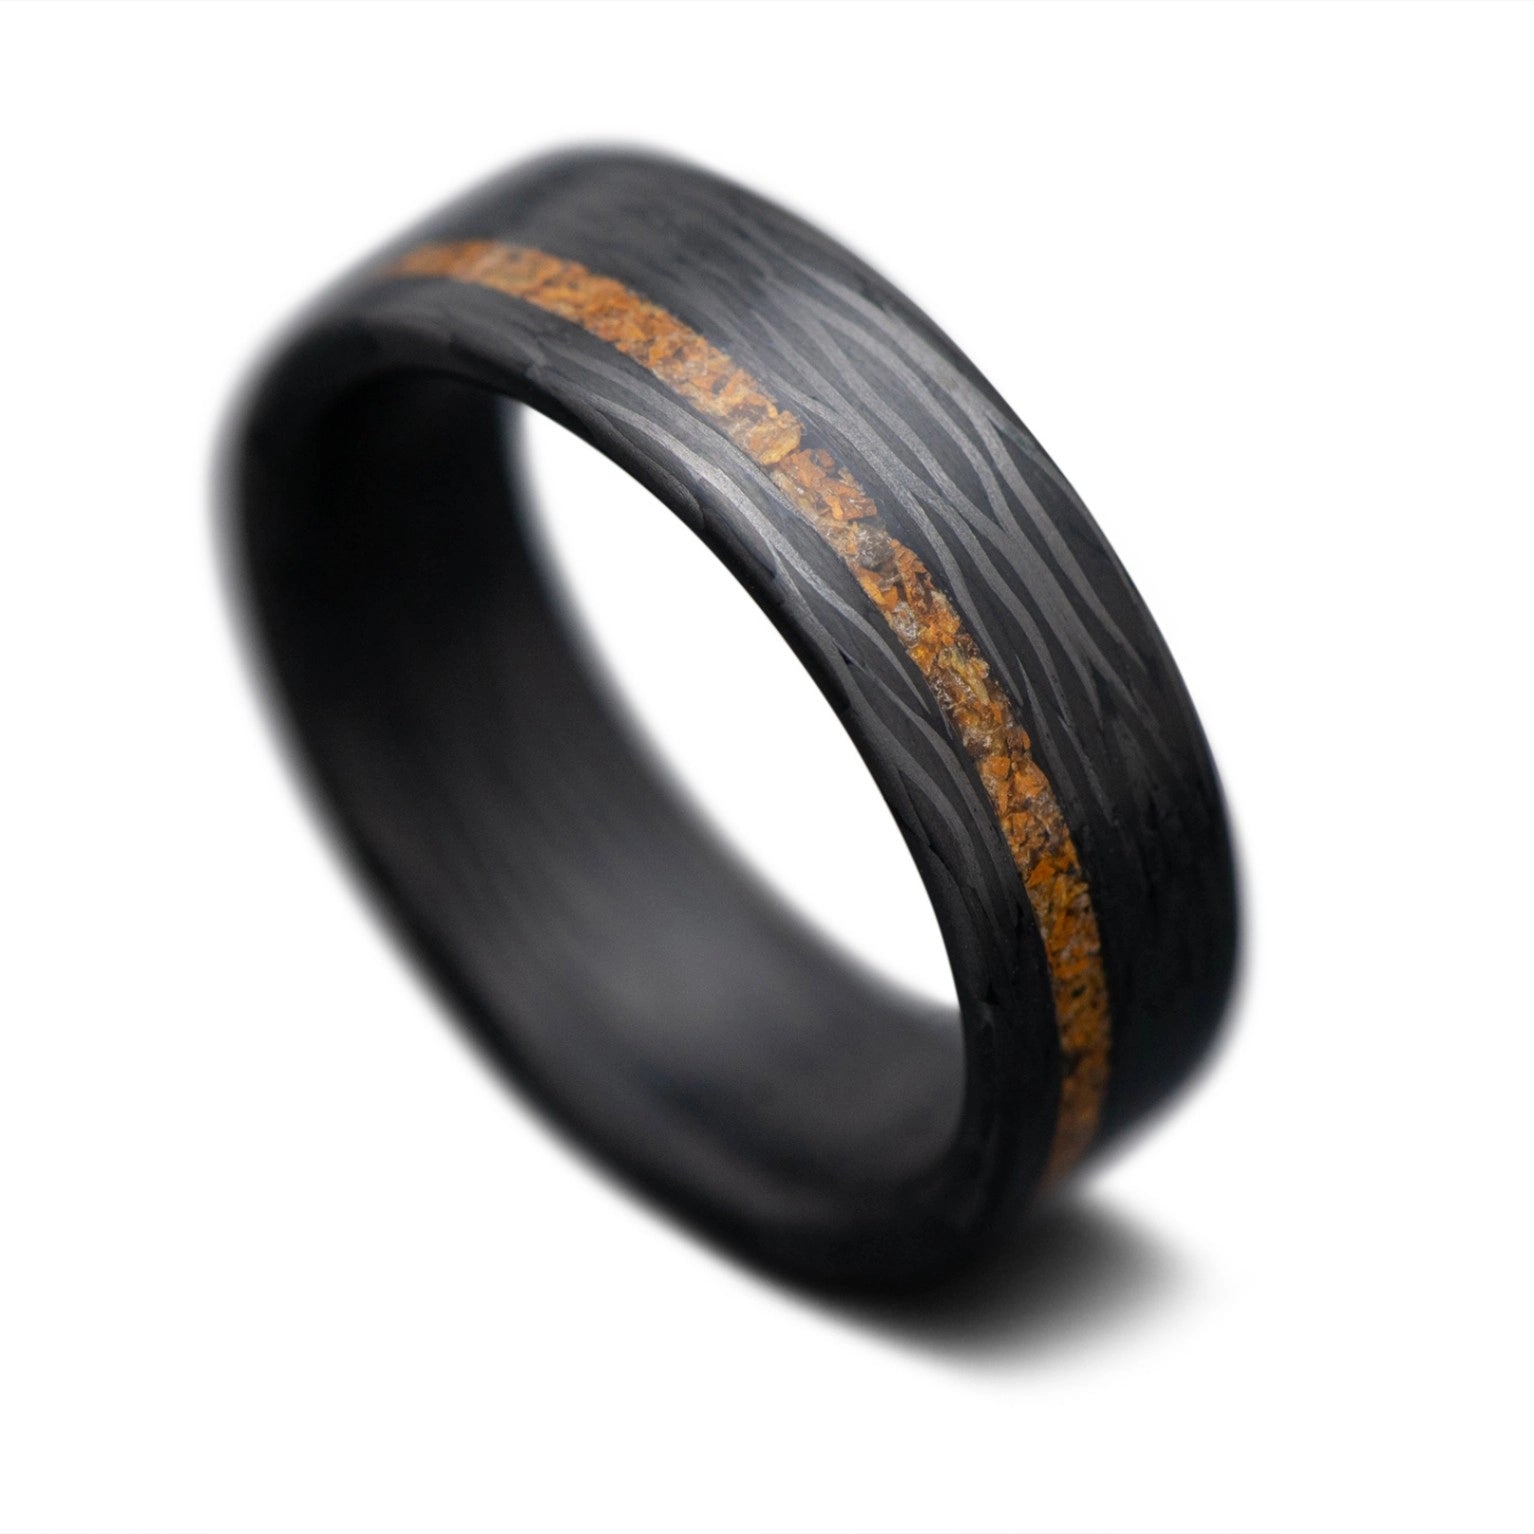 CarbonX Core ring with Tiger Eye inlay, 7mm -THE DIVERGENCE